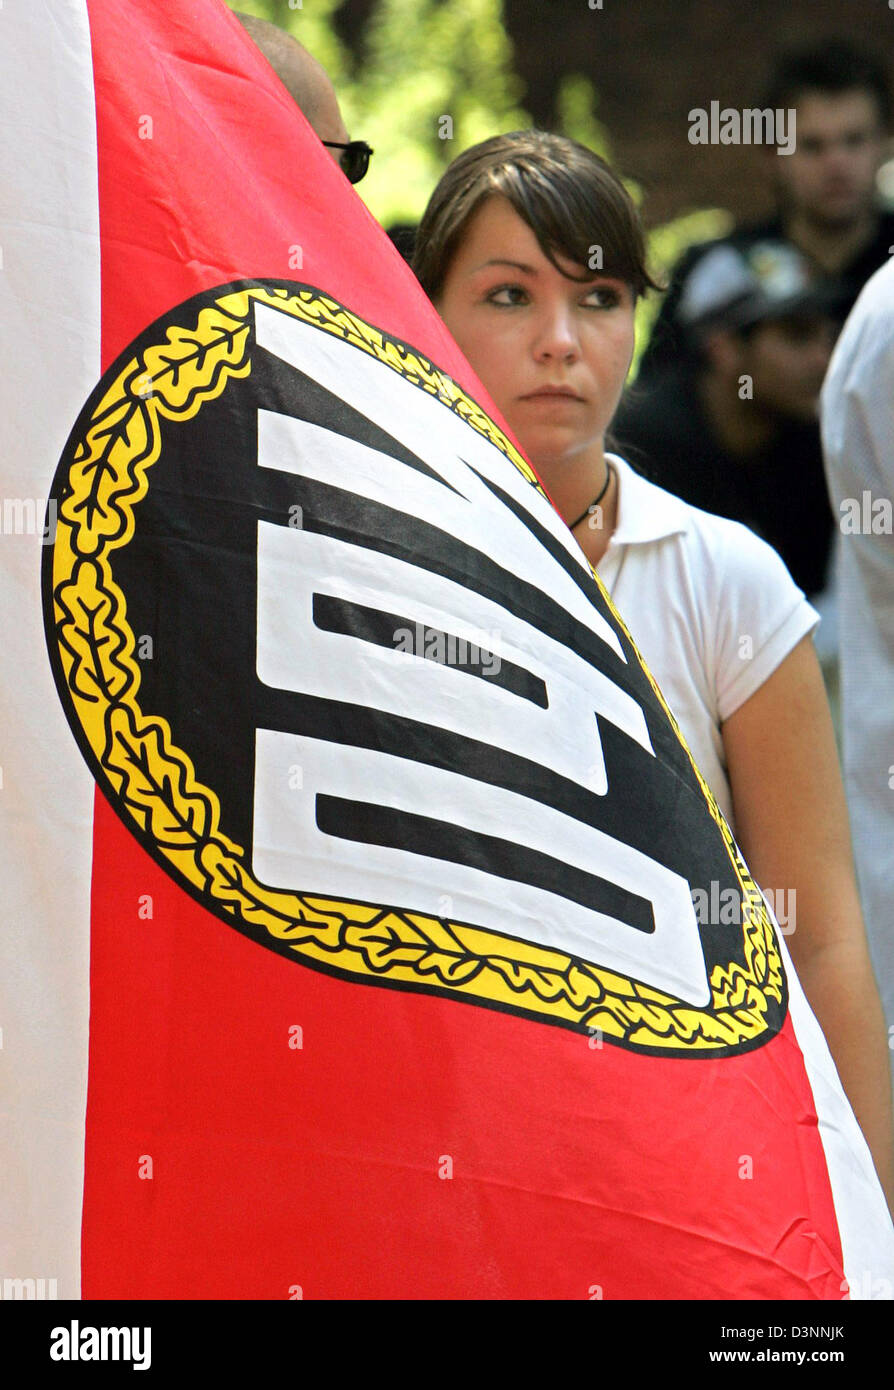 A neo-Nazi pictured with her flag in Gelsenkirchen, Germany, Saturday, 10 June 2006. The rally of circa 200 rightist-extremist party NPD supporters was permitted by the Federal Constitutional Court only Friday, 9 June after the higher administrative court Muenster had prohibited it. The judges in Muenster reasoned their decision with a massive breach of the public security. Photo:  Stock Photo